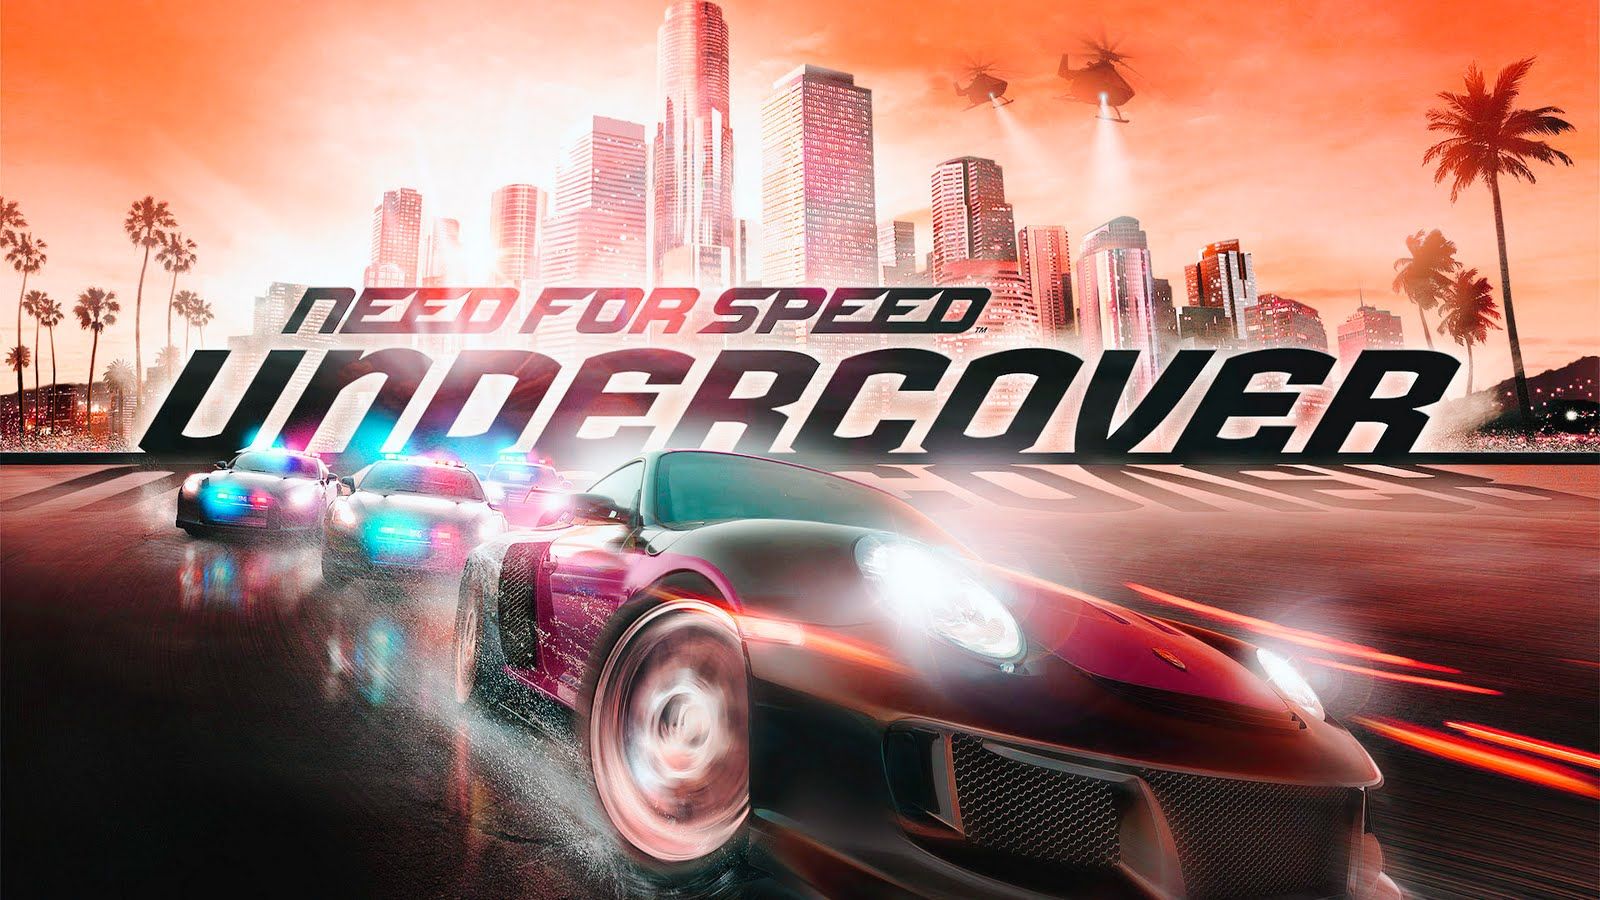 Undercover Background. Need for Speed Undercover Wallpaper, Undercover Cop Wallpaper and K.C. Undercover Wallpaper